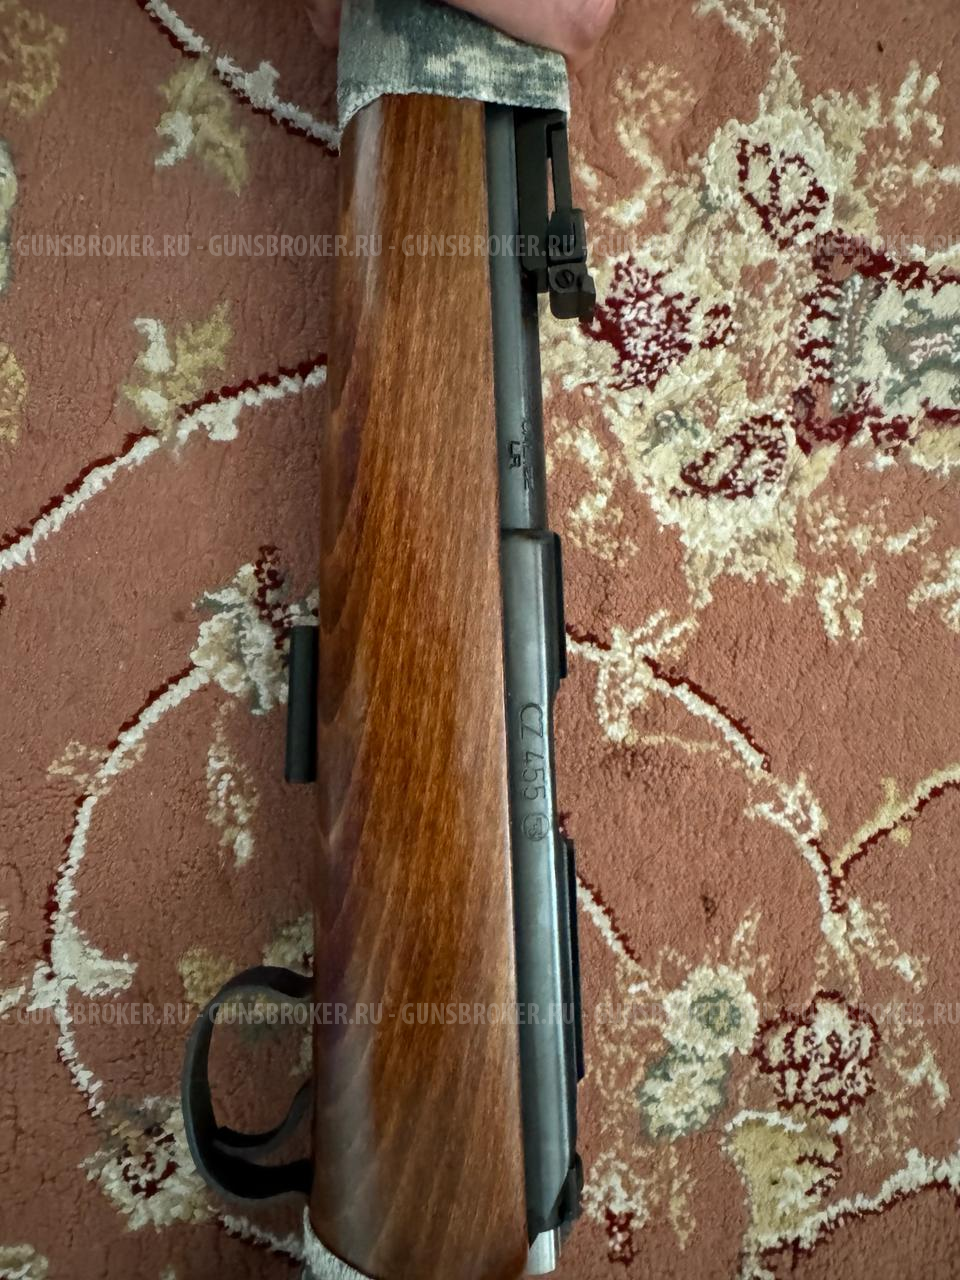 CZ 455 Forest edition 22lr